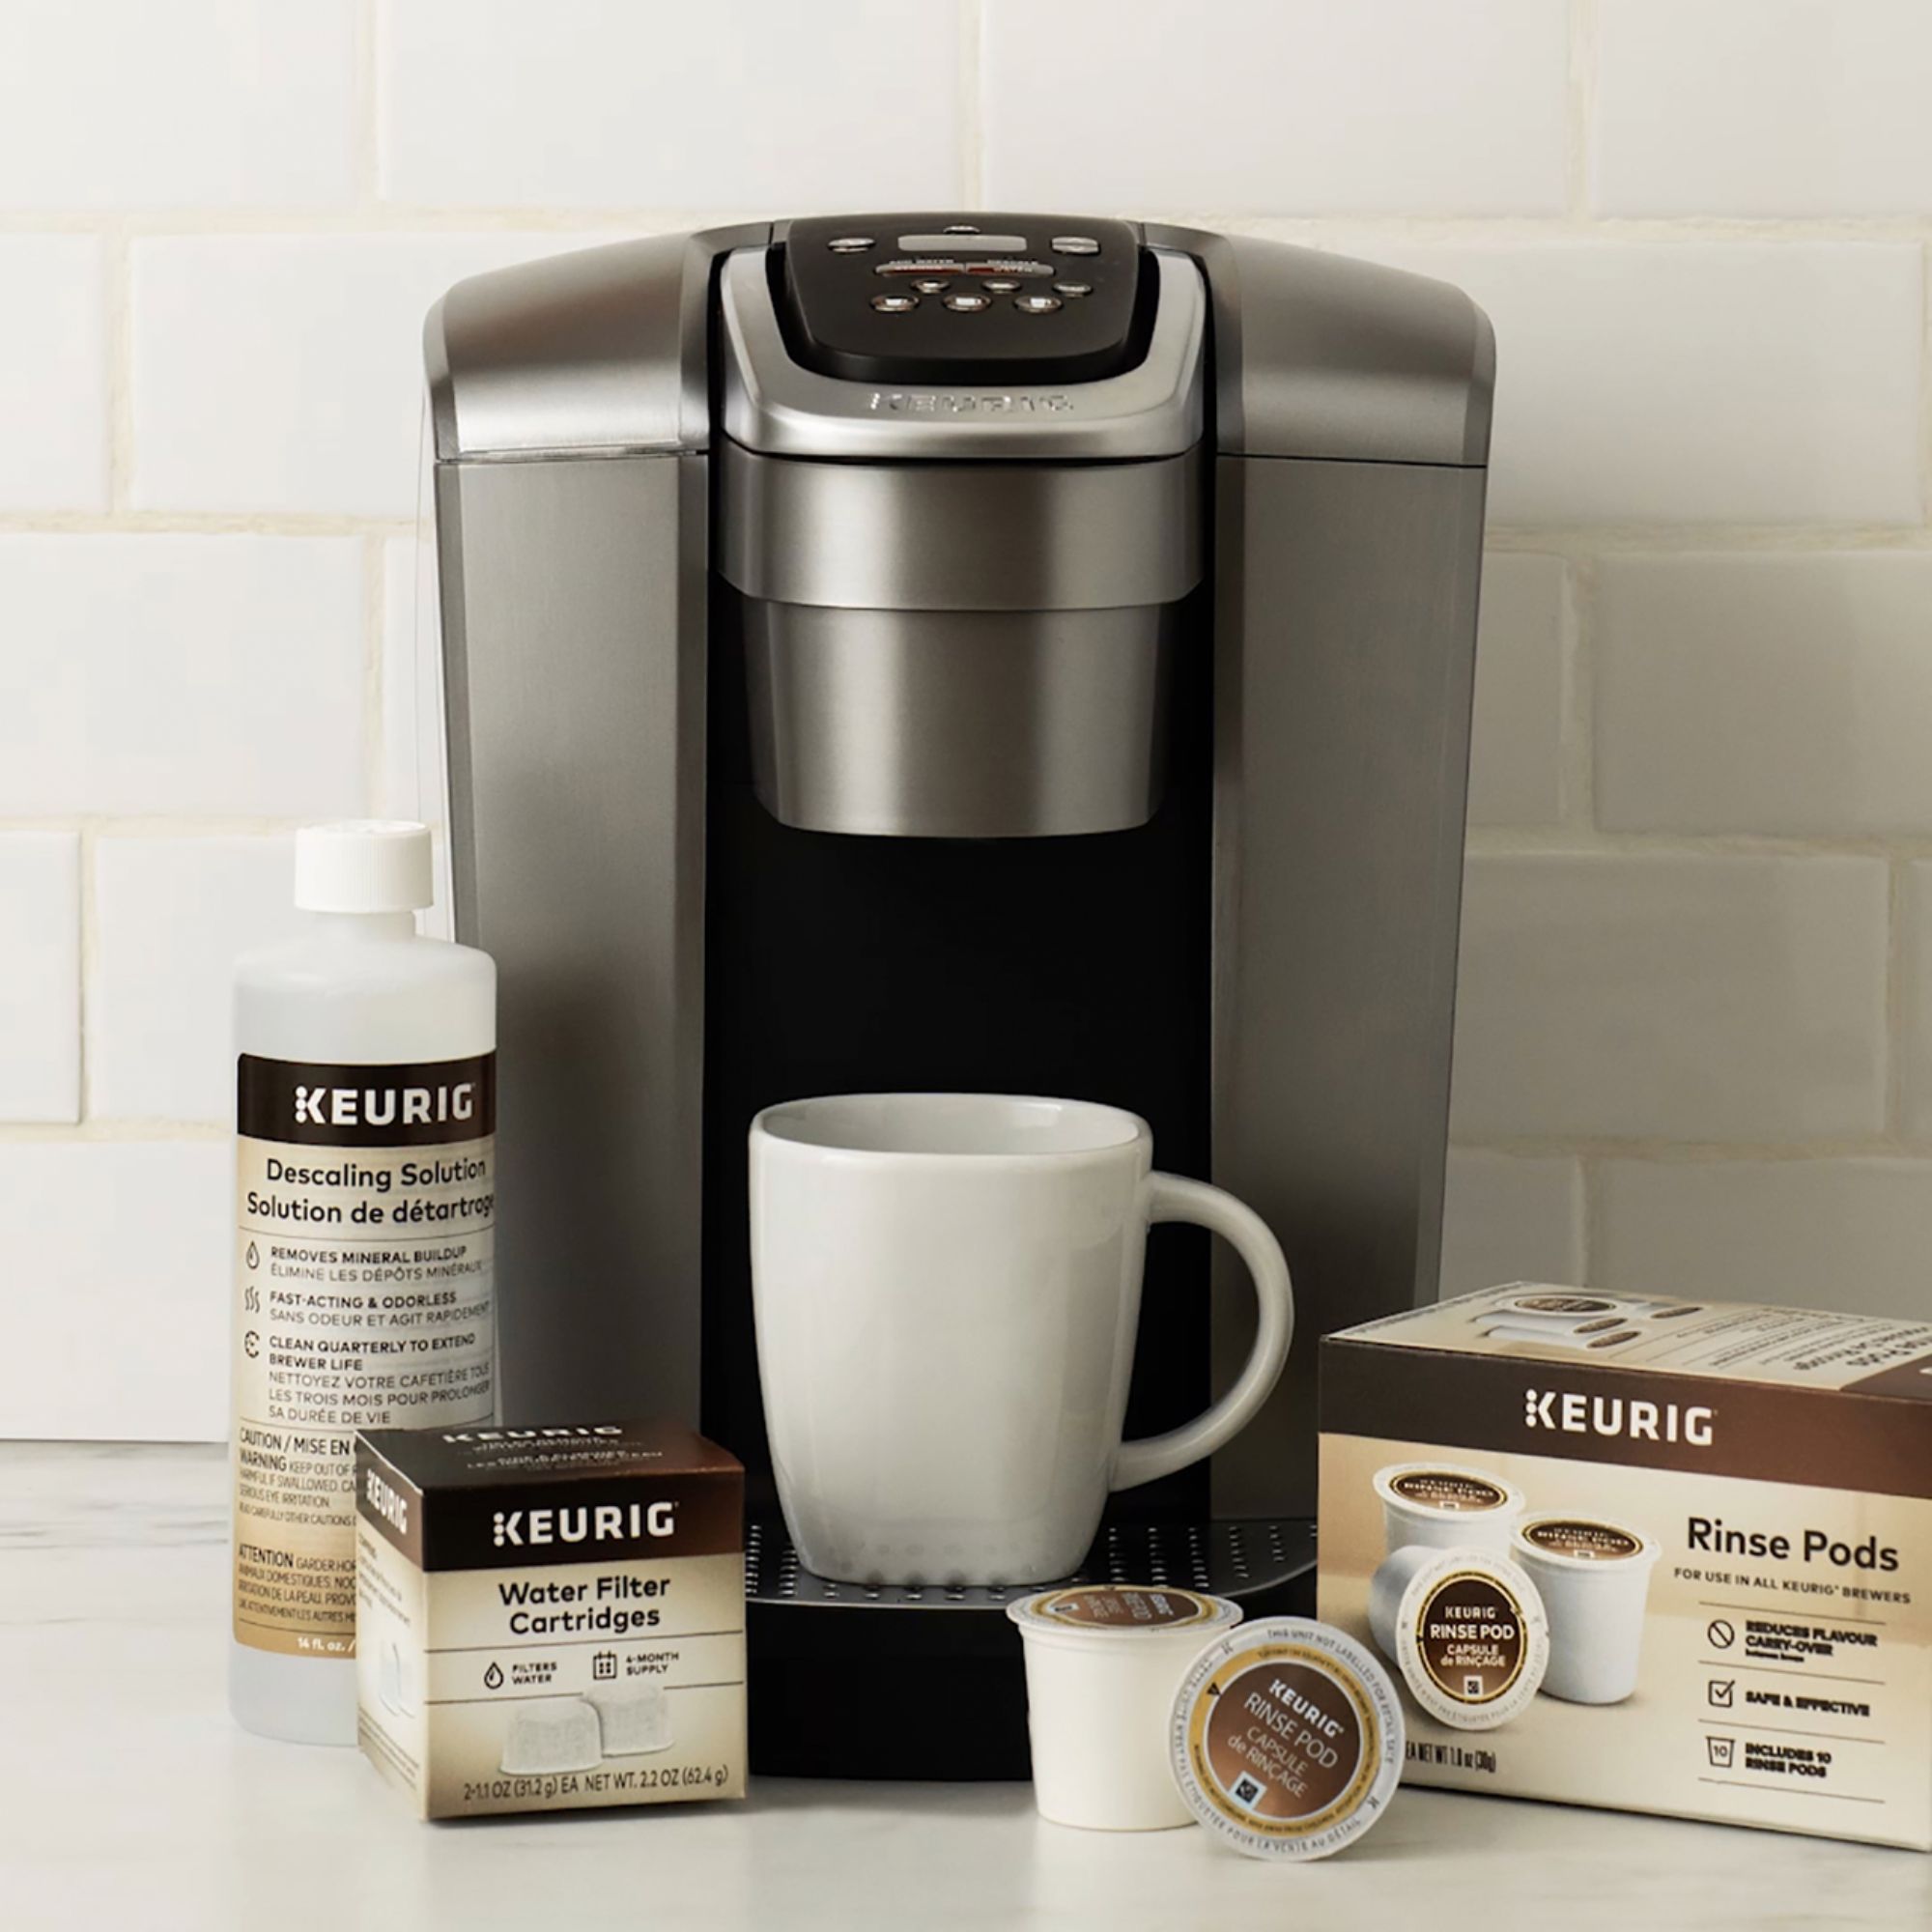 How To Descale A Keurig Duo With Vinegar